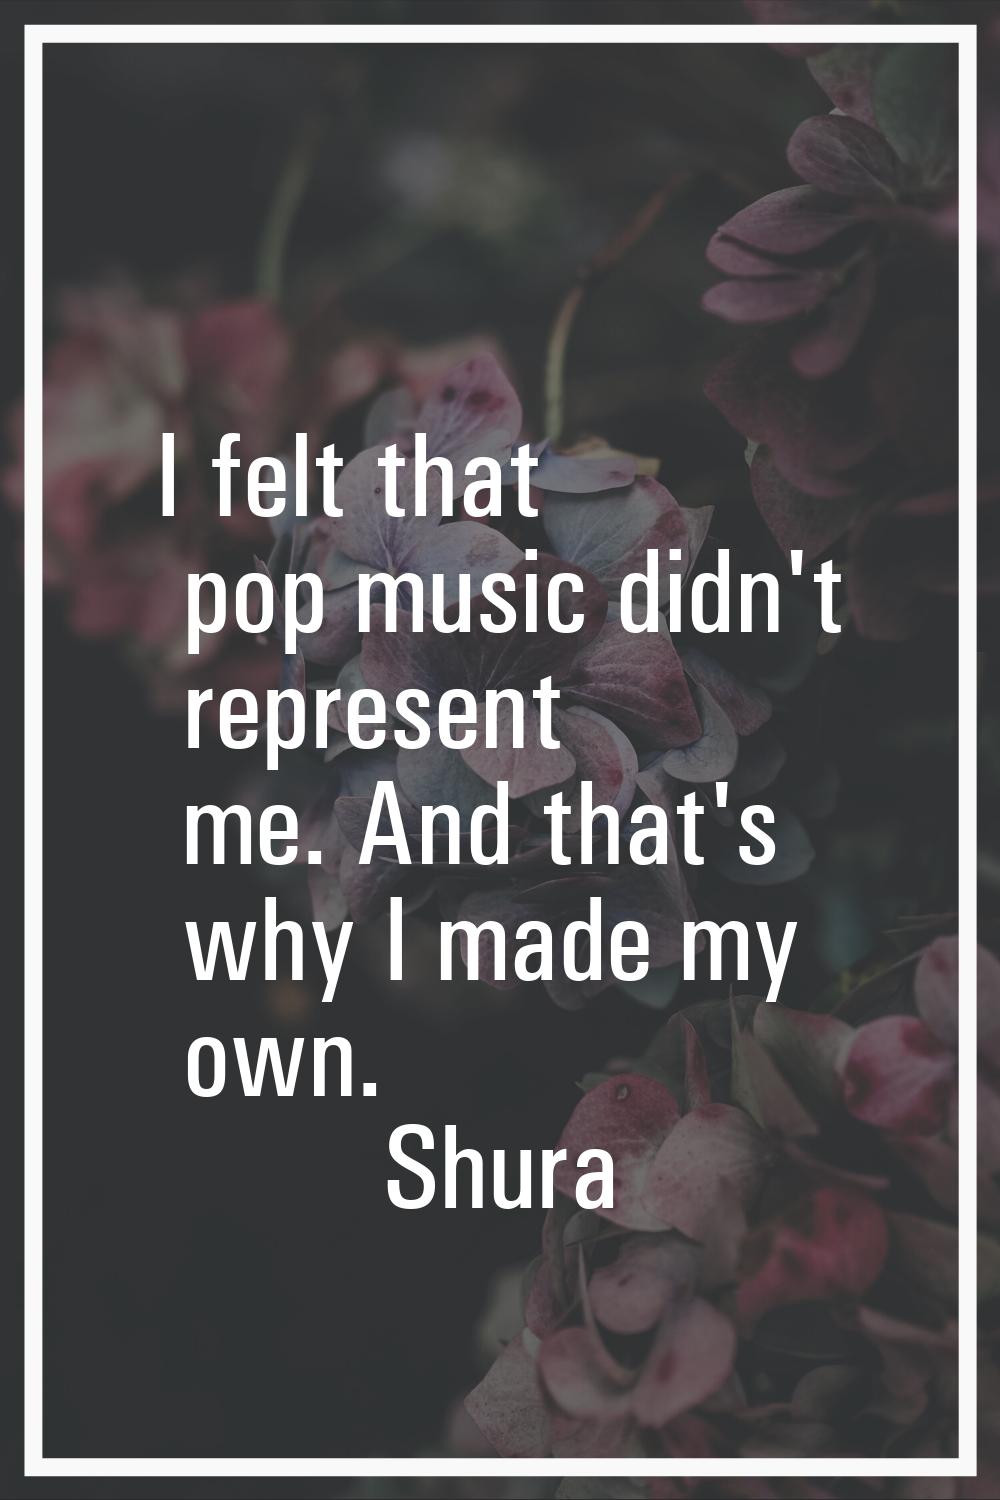 I felt that pop music didn't represent me. And that's why I made my own.